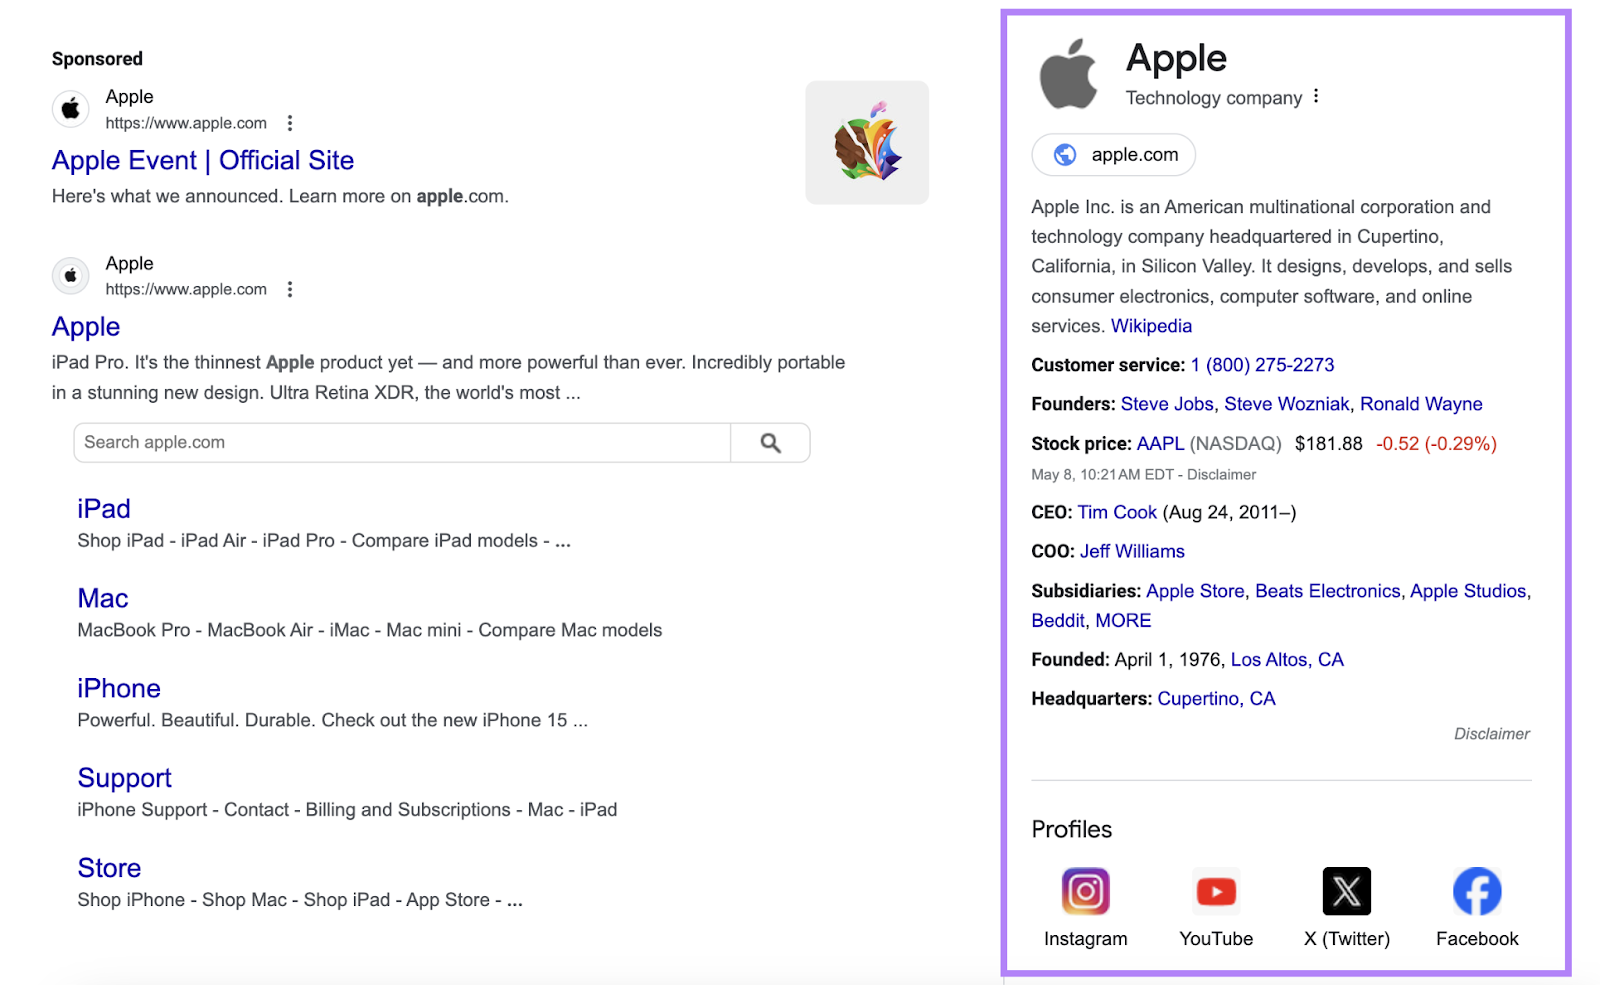 search for apple shows company information and social profiles on the right-hand side